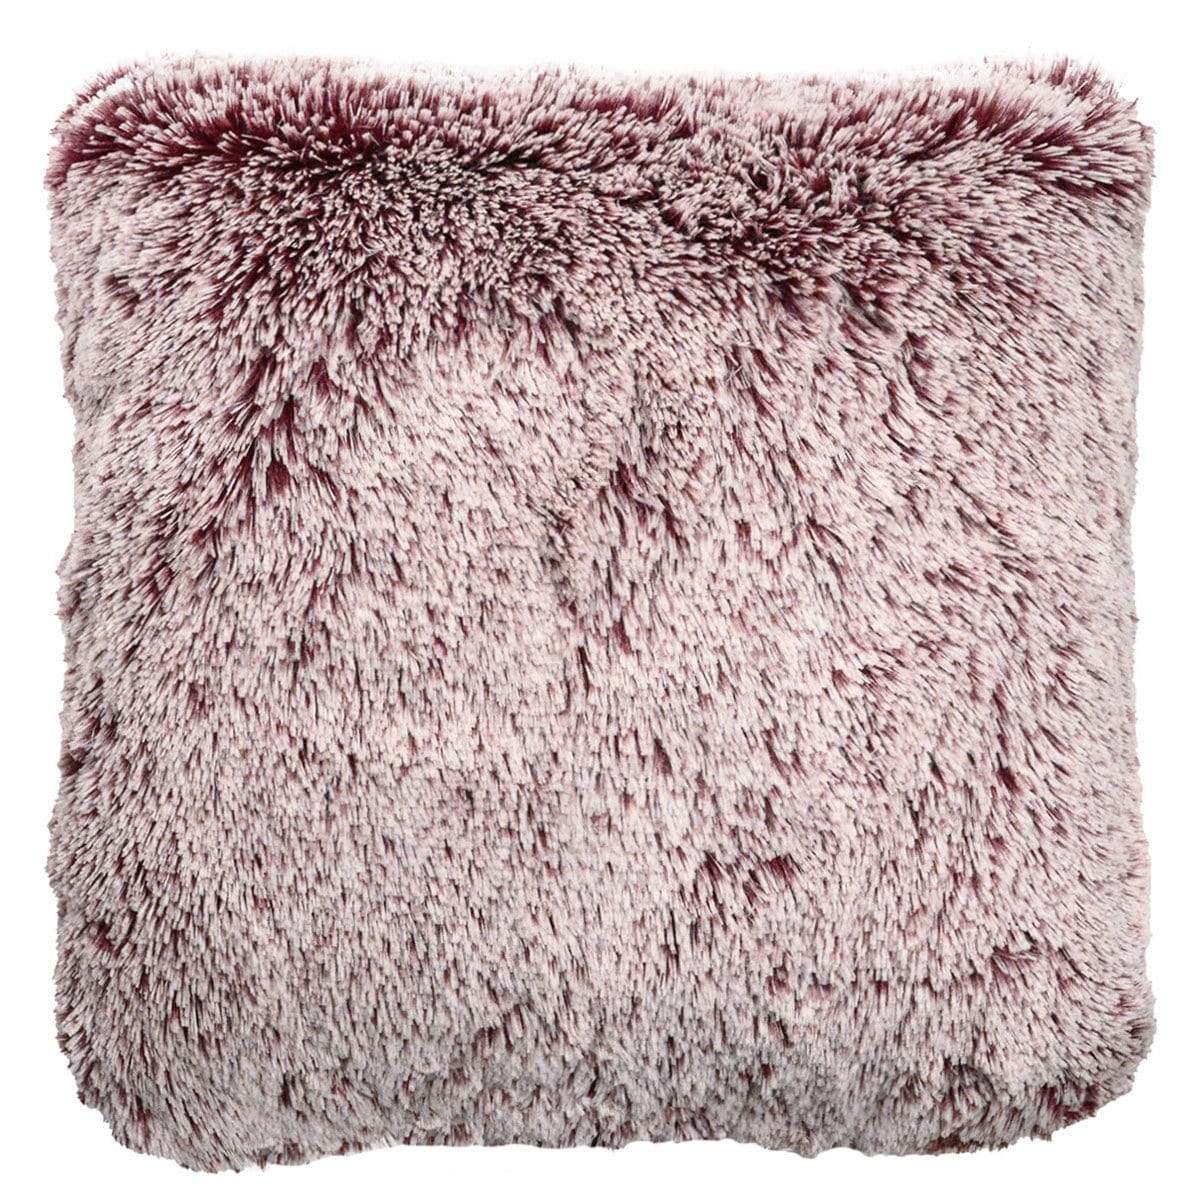 Pillow Sham - Berry Foxy Faux Fur - Handmade in the USA by Pandemonium Seattle